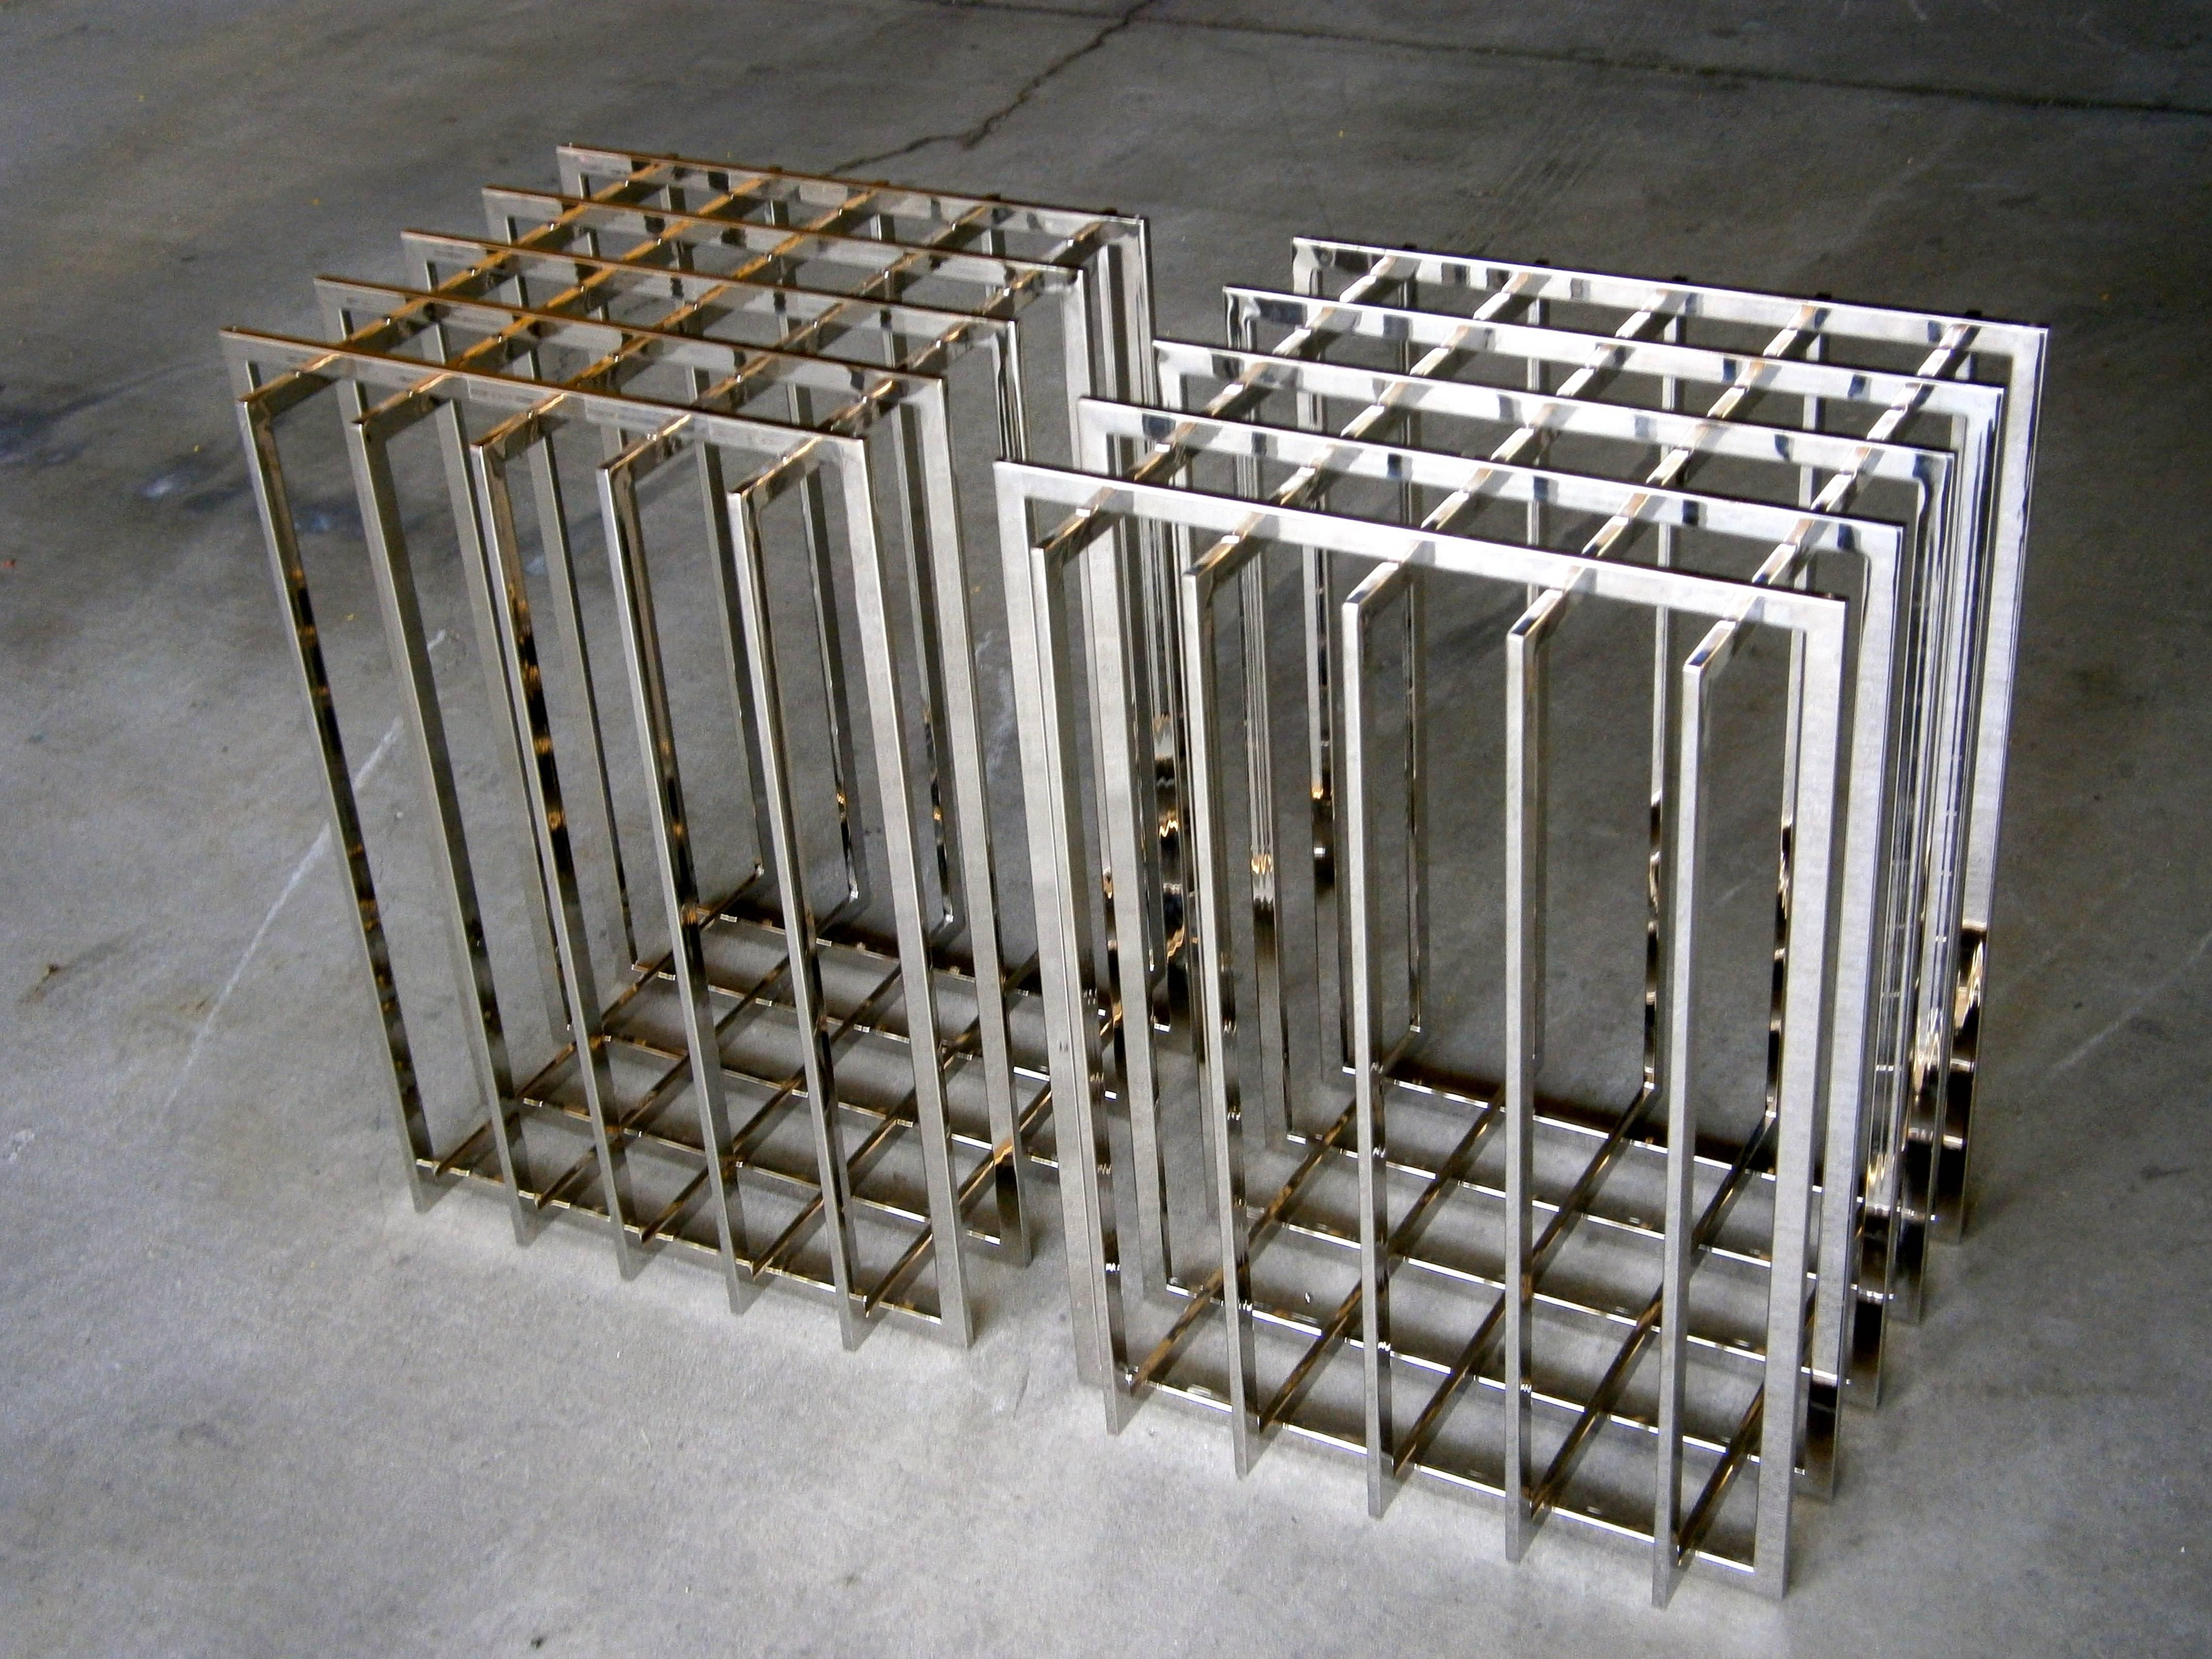 Metal Pair of Nickel Plated Cage-Form Table Bases by Pierre Cardin  C. 1970s